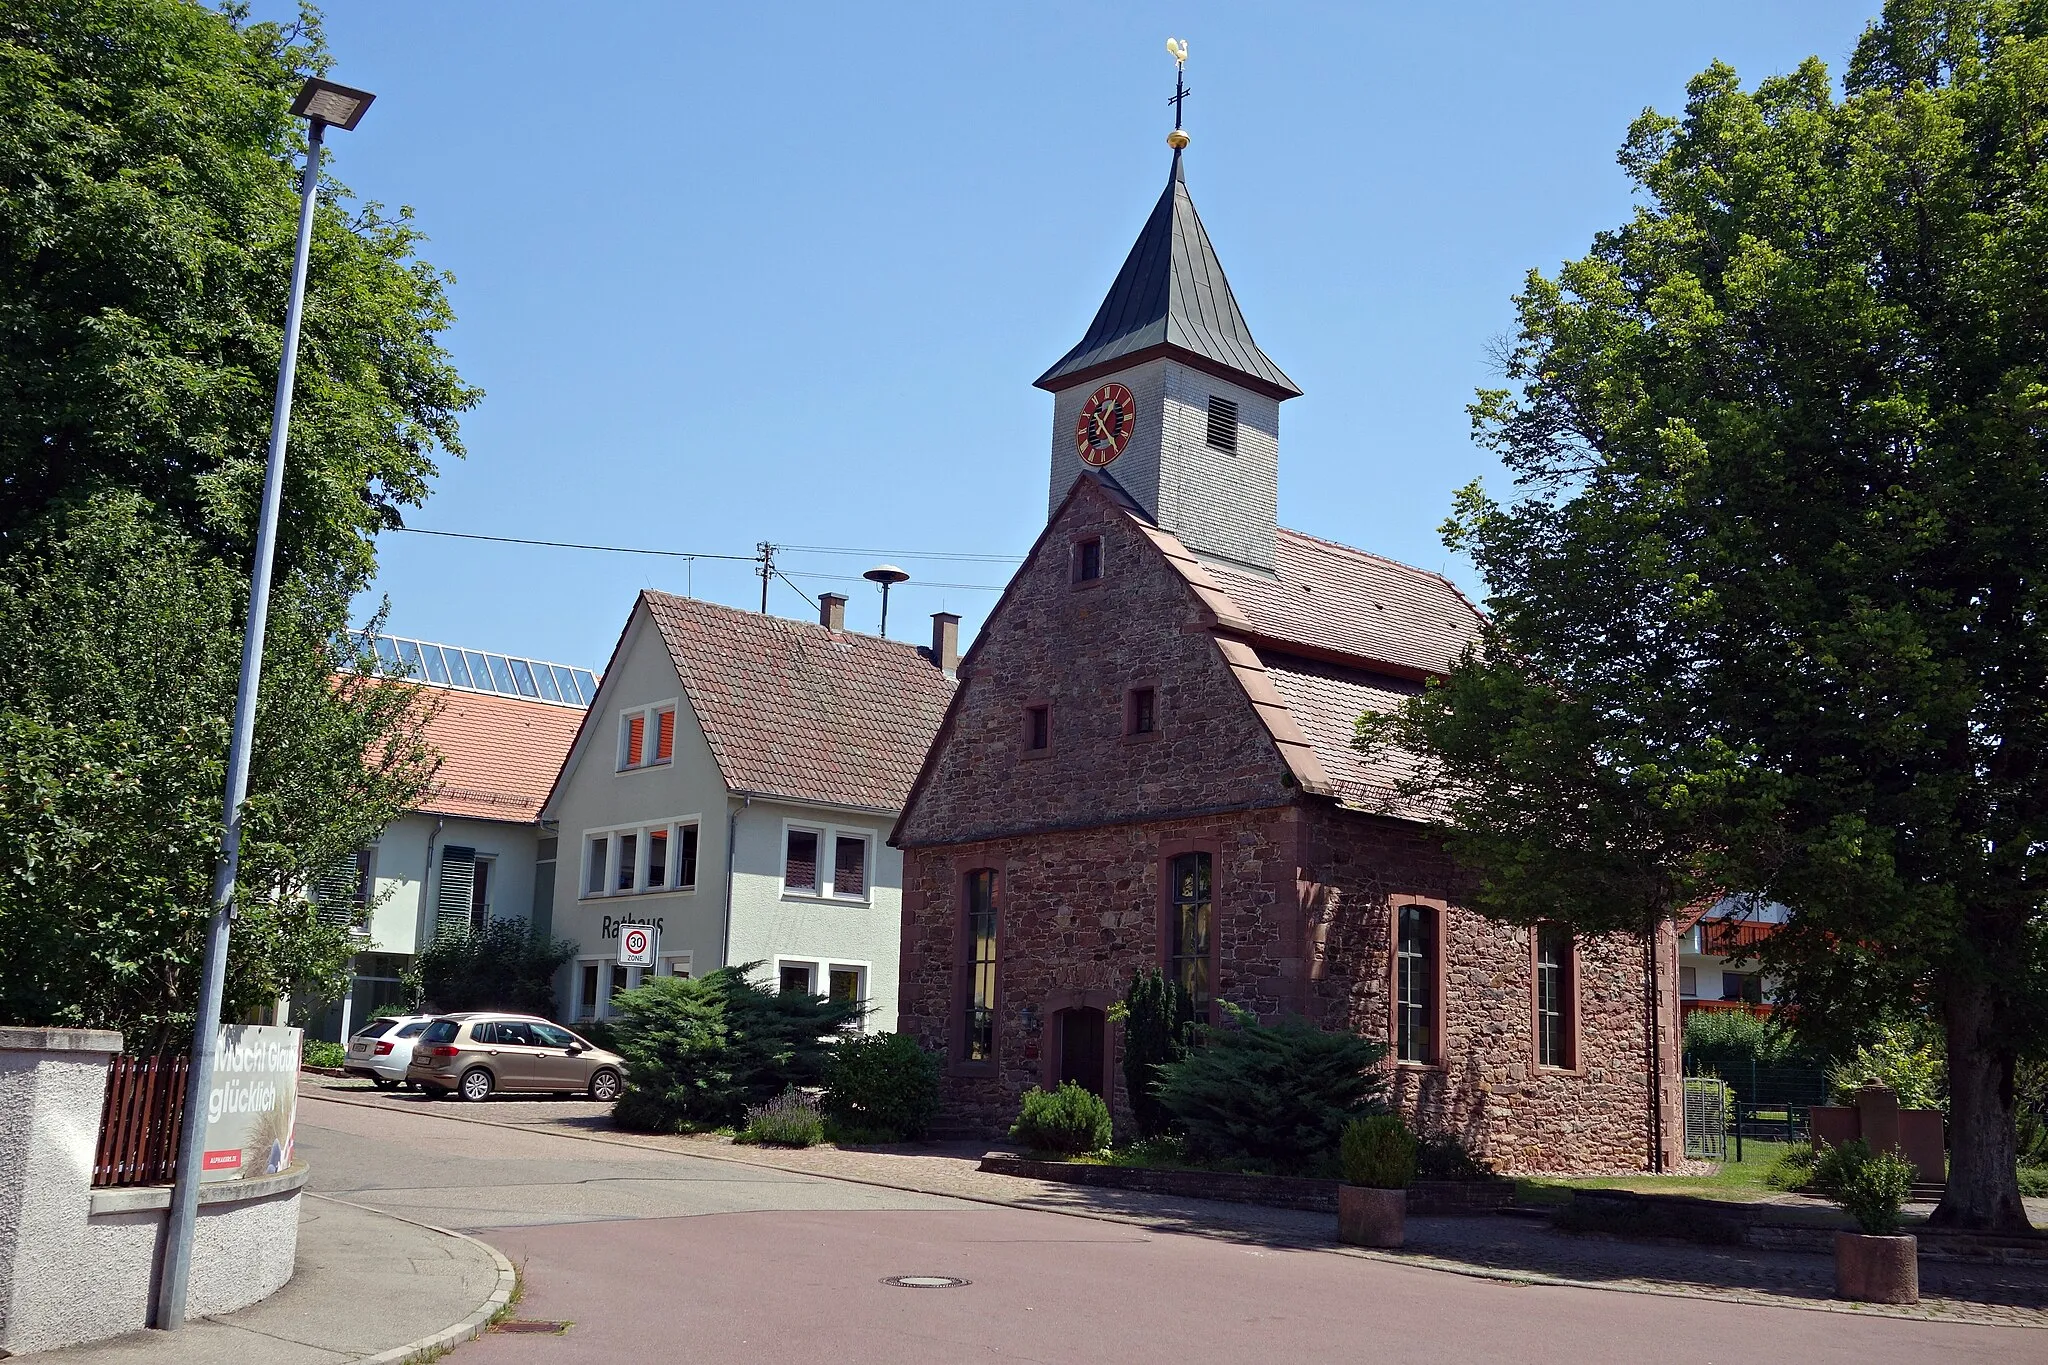 Photo showing: Evangelical Church in Neuhengstett, a village in the southwest of Germany. The old town hall is visible behind the church.